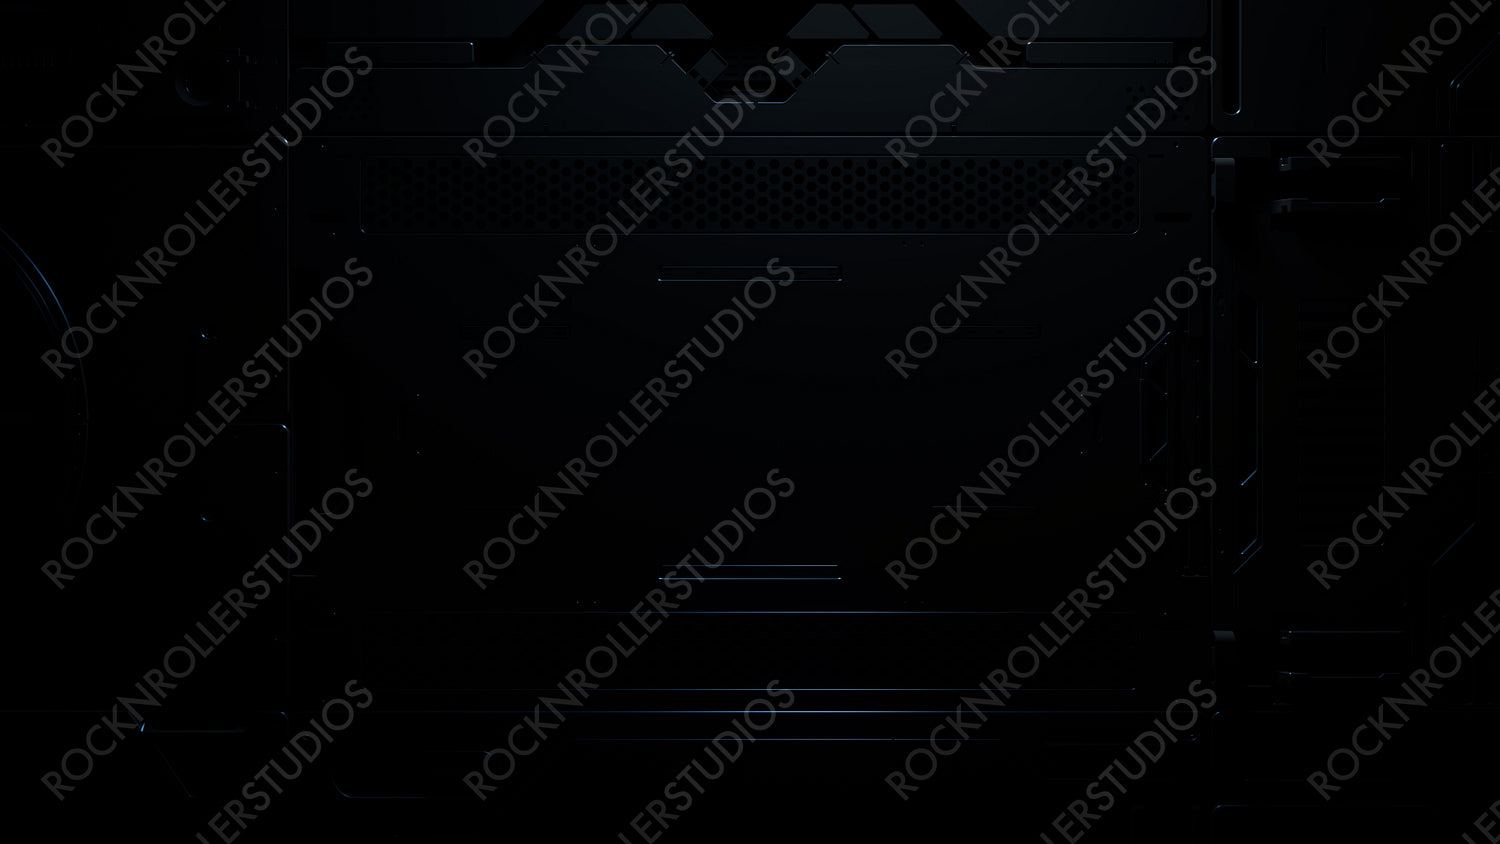 Sci-Fi Background with Black, Advanced Technology Panels. 3D Render.